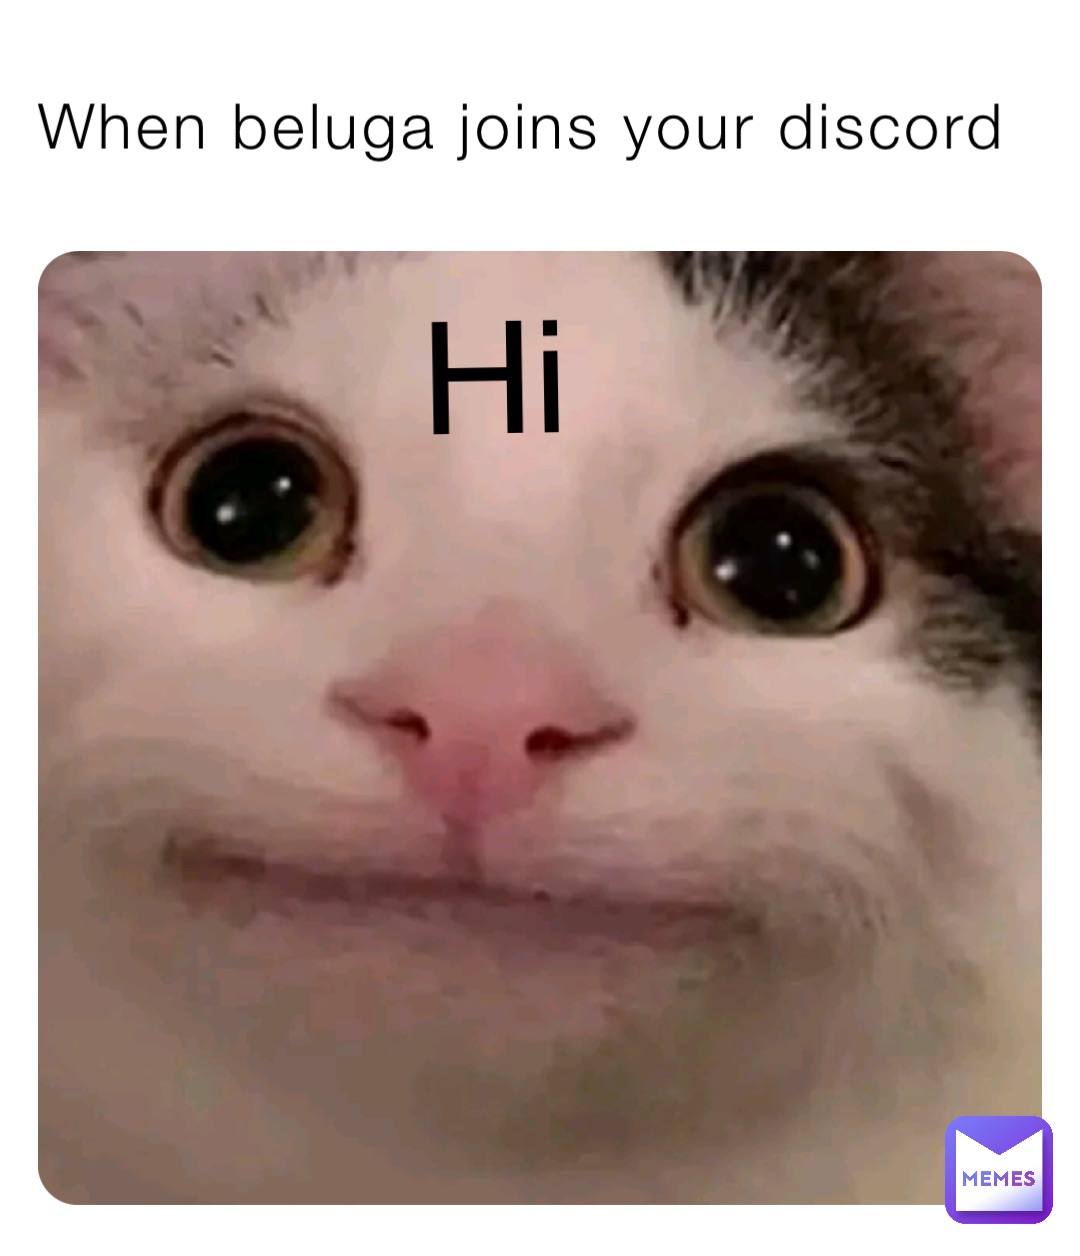 When beluga joins your discord